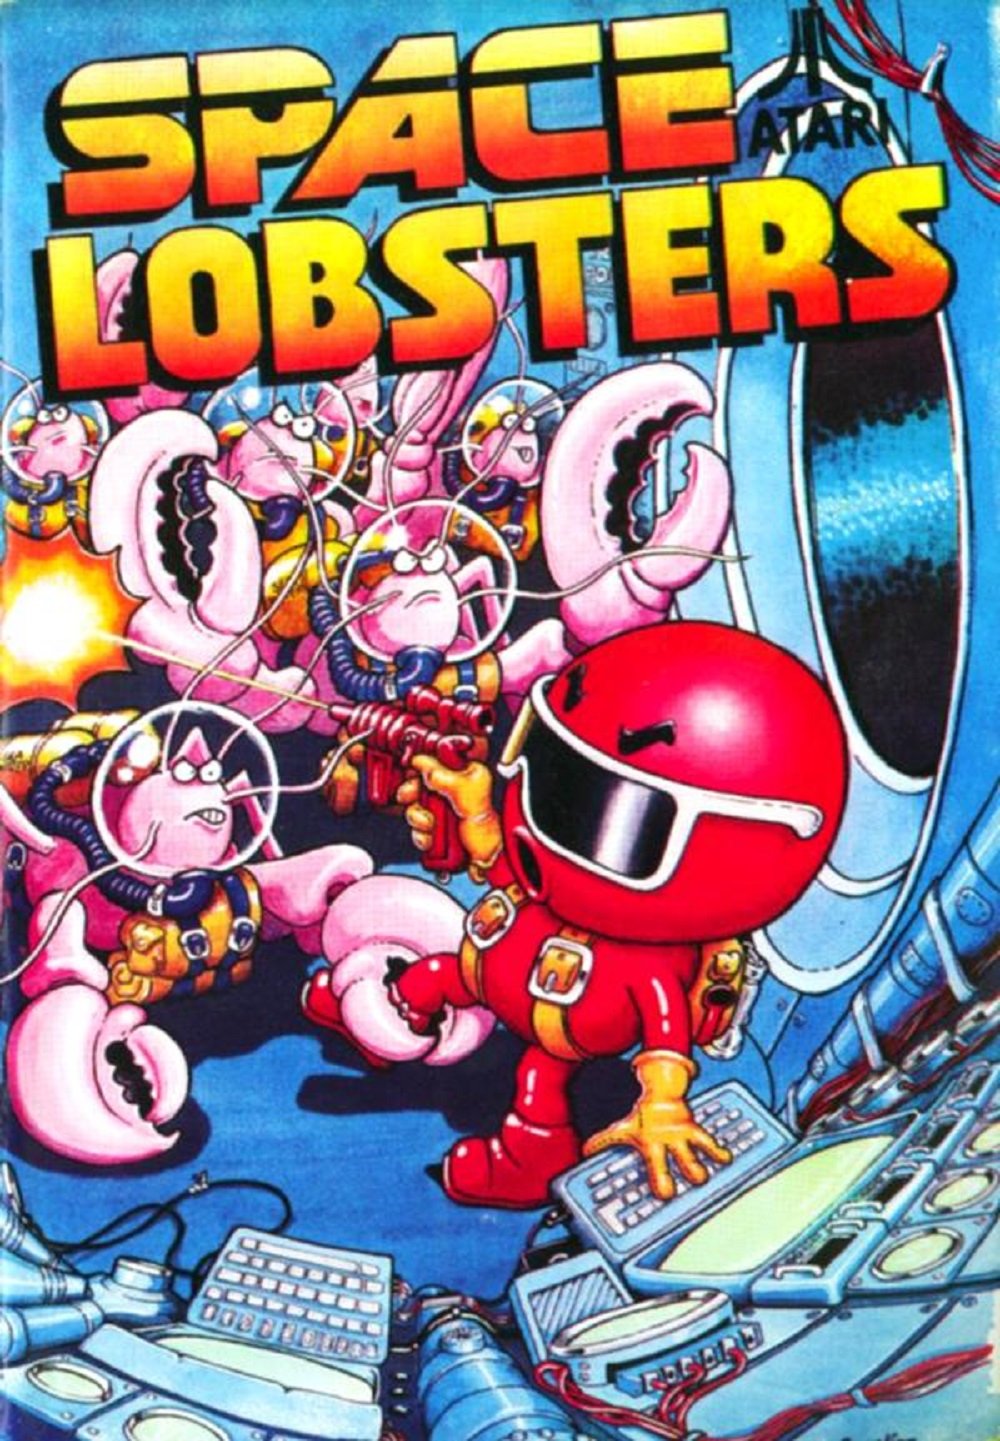 Image of Space Lobsters